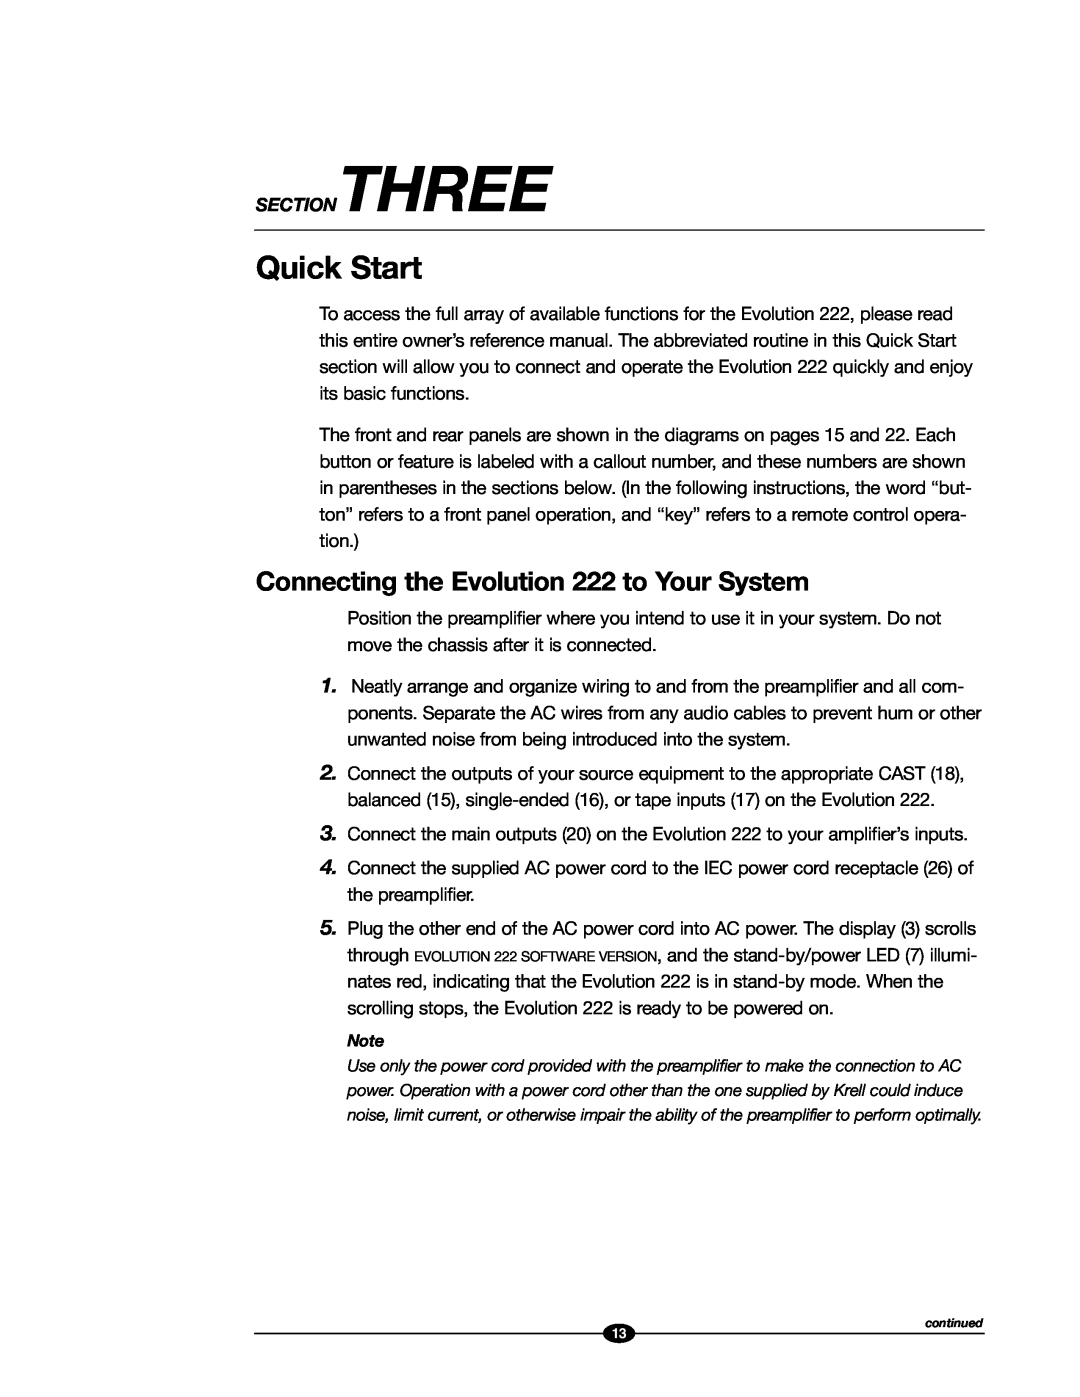 Evolution Technologies manual Quick Start, Connecting the Evolution 222 to Your System 